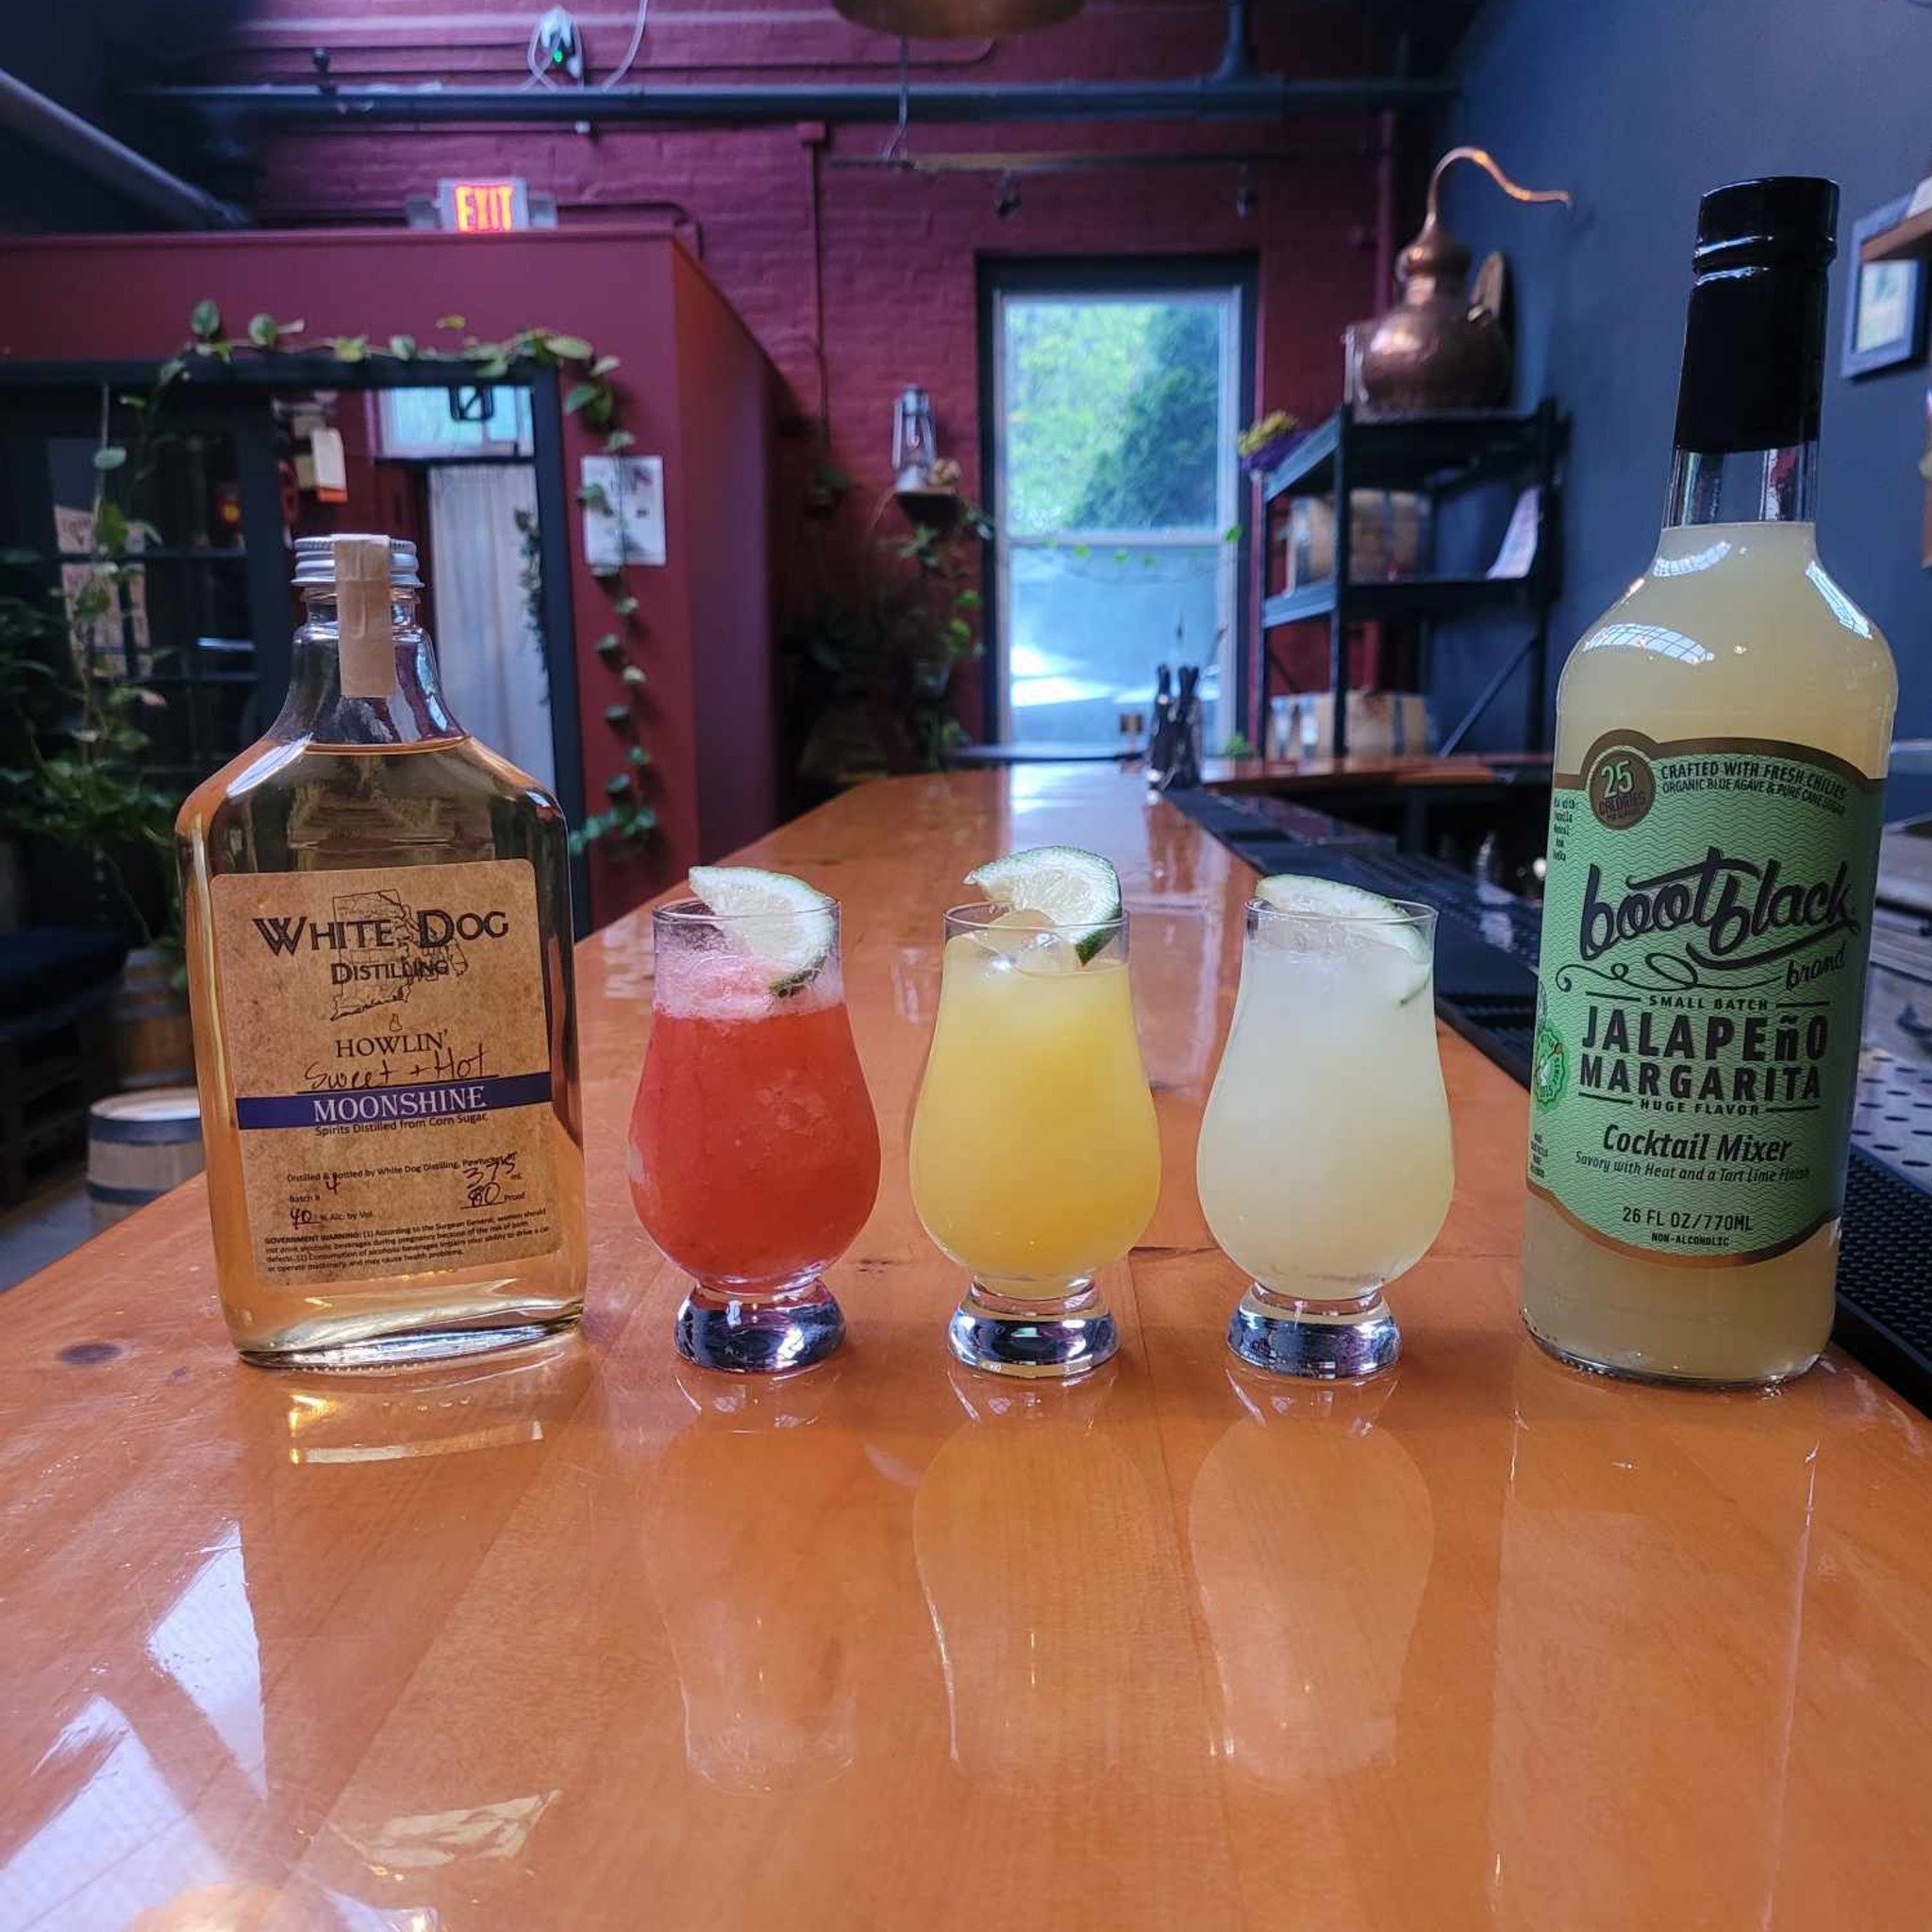 Cinco De Mayo Shinegarita flights all weekend long! \
(Strawberry, Spicy Pineapple, Jalapeno)
free chips and salsa while supplies last, 
Spicy Pineapple Shinegarita: Spicy is easy with White Dog and Bootblack Margarita mix!